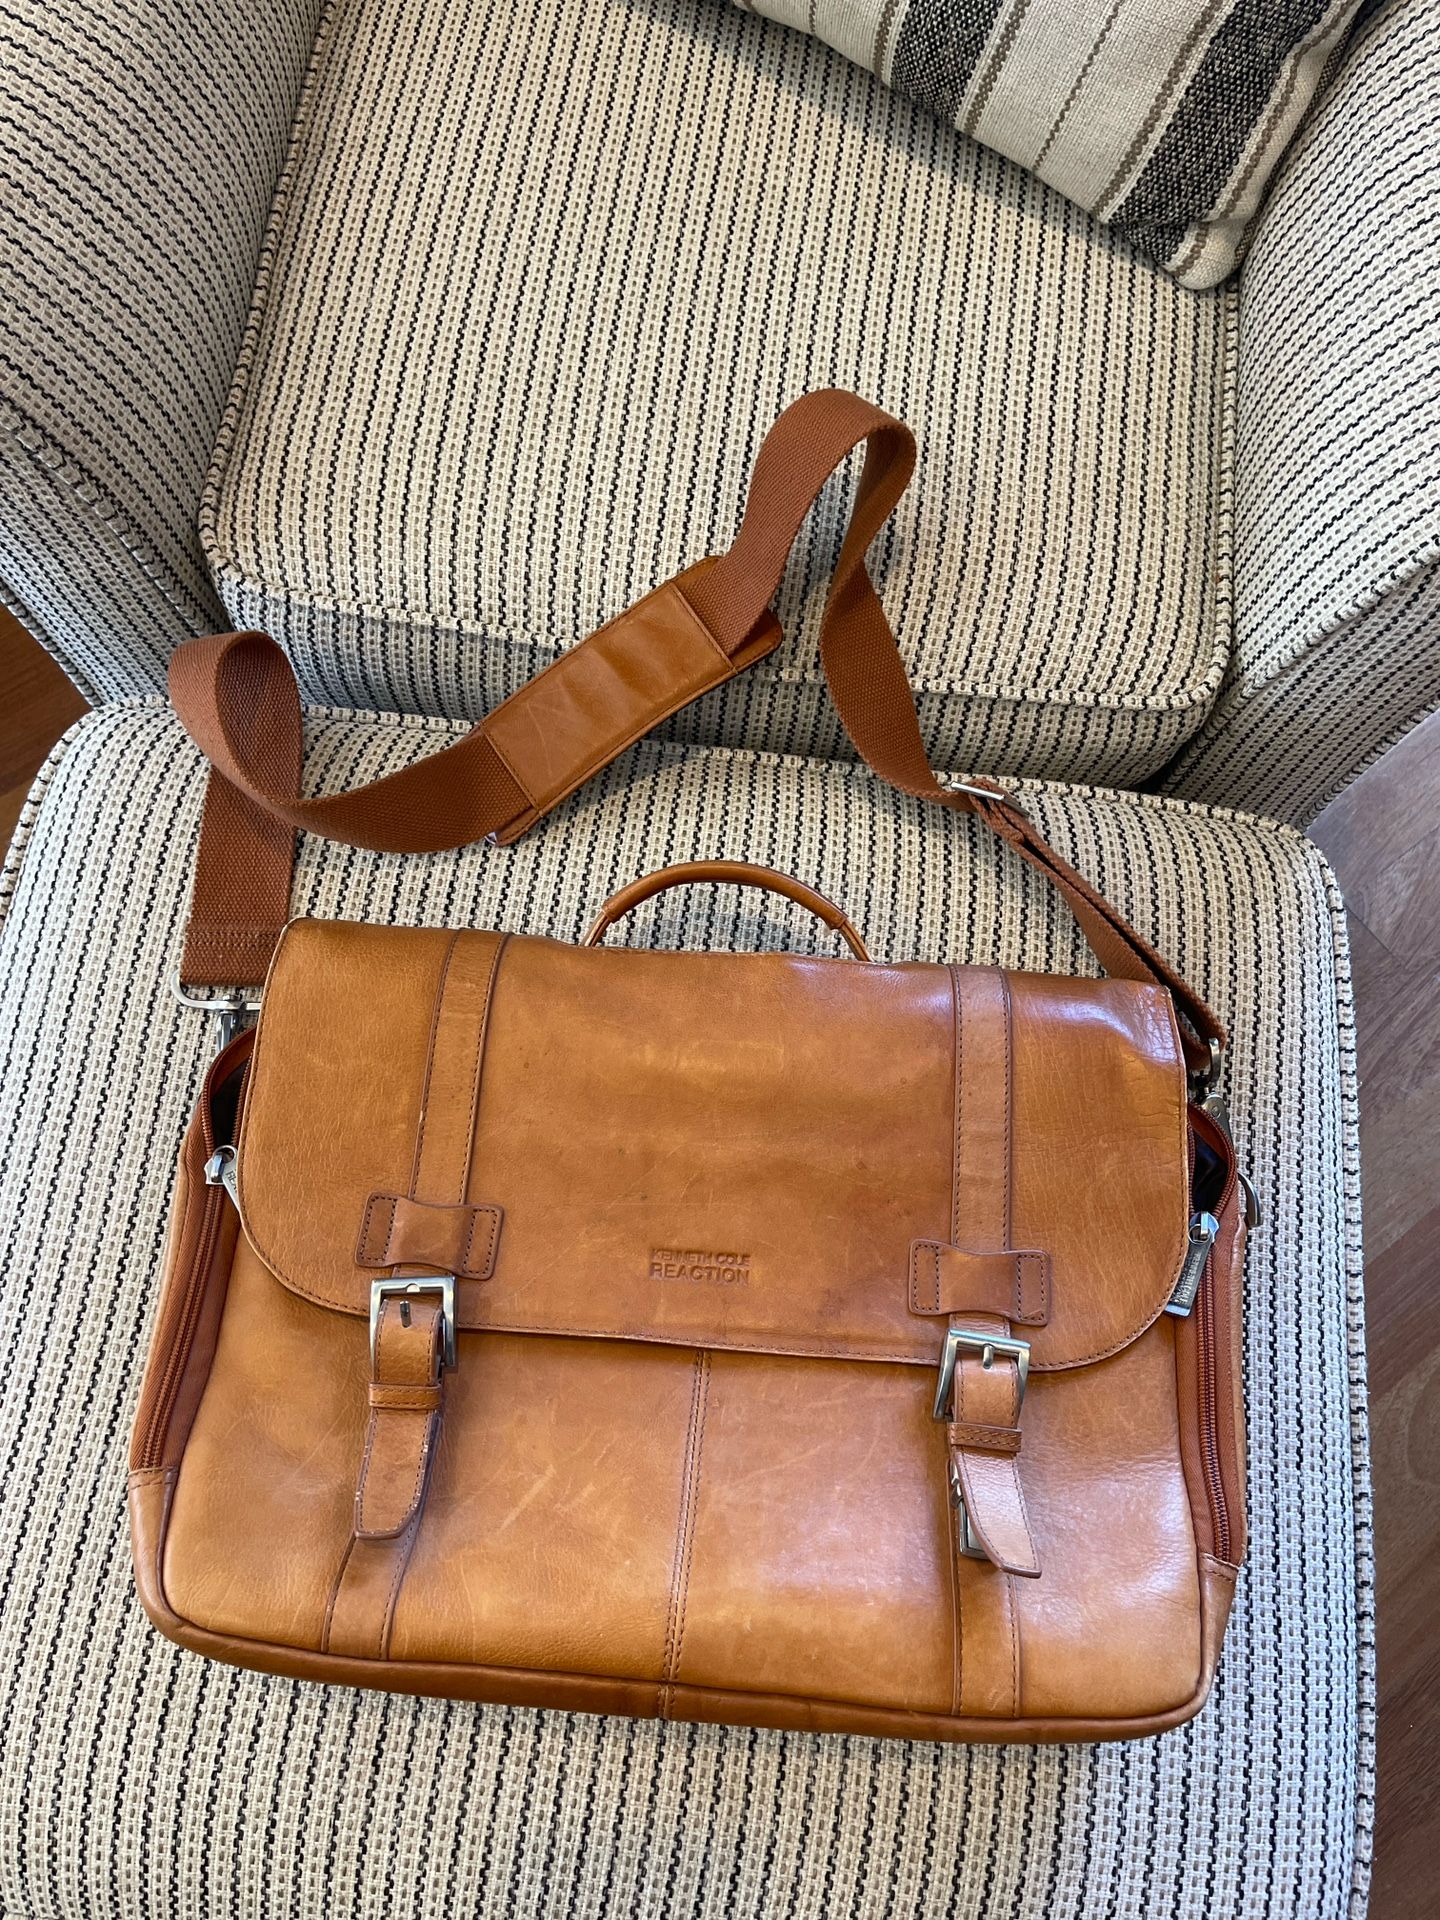 Leather Kenneth Cole Laptop Bag